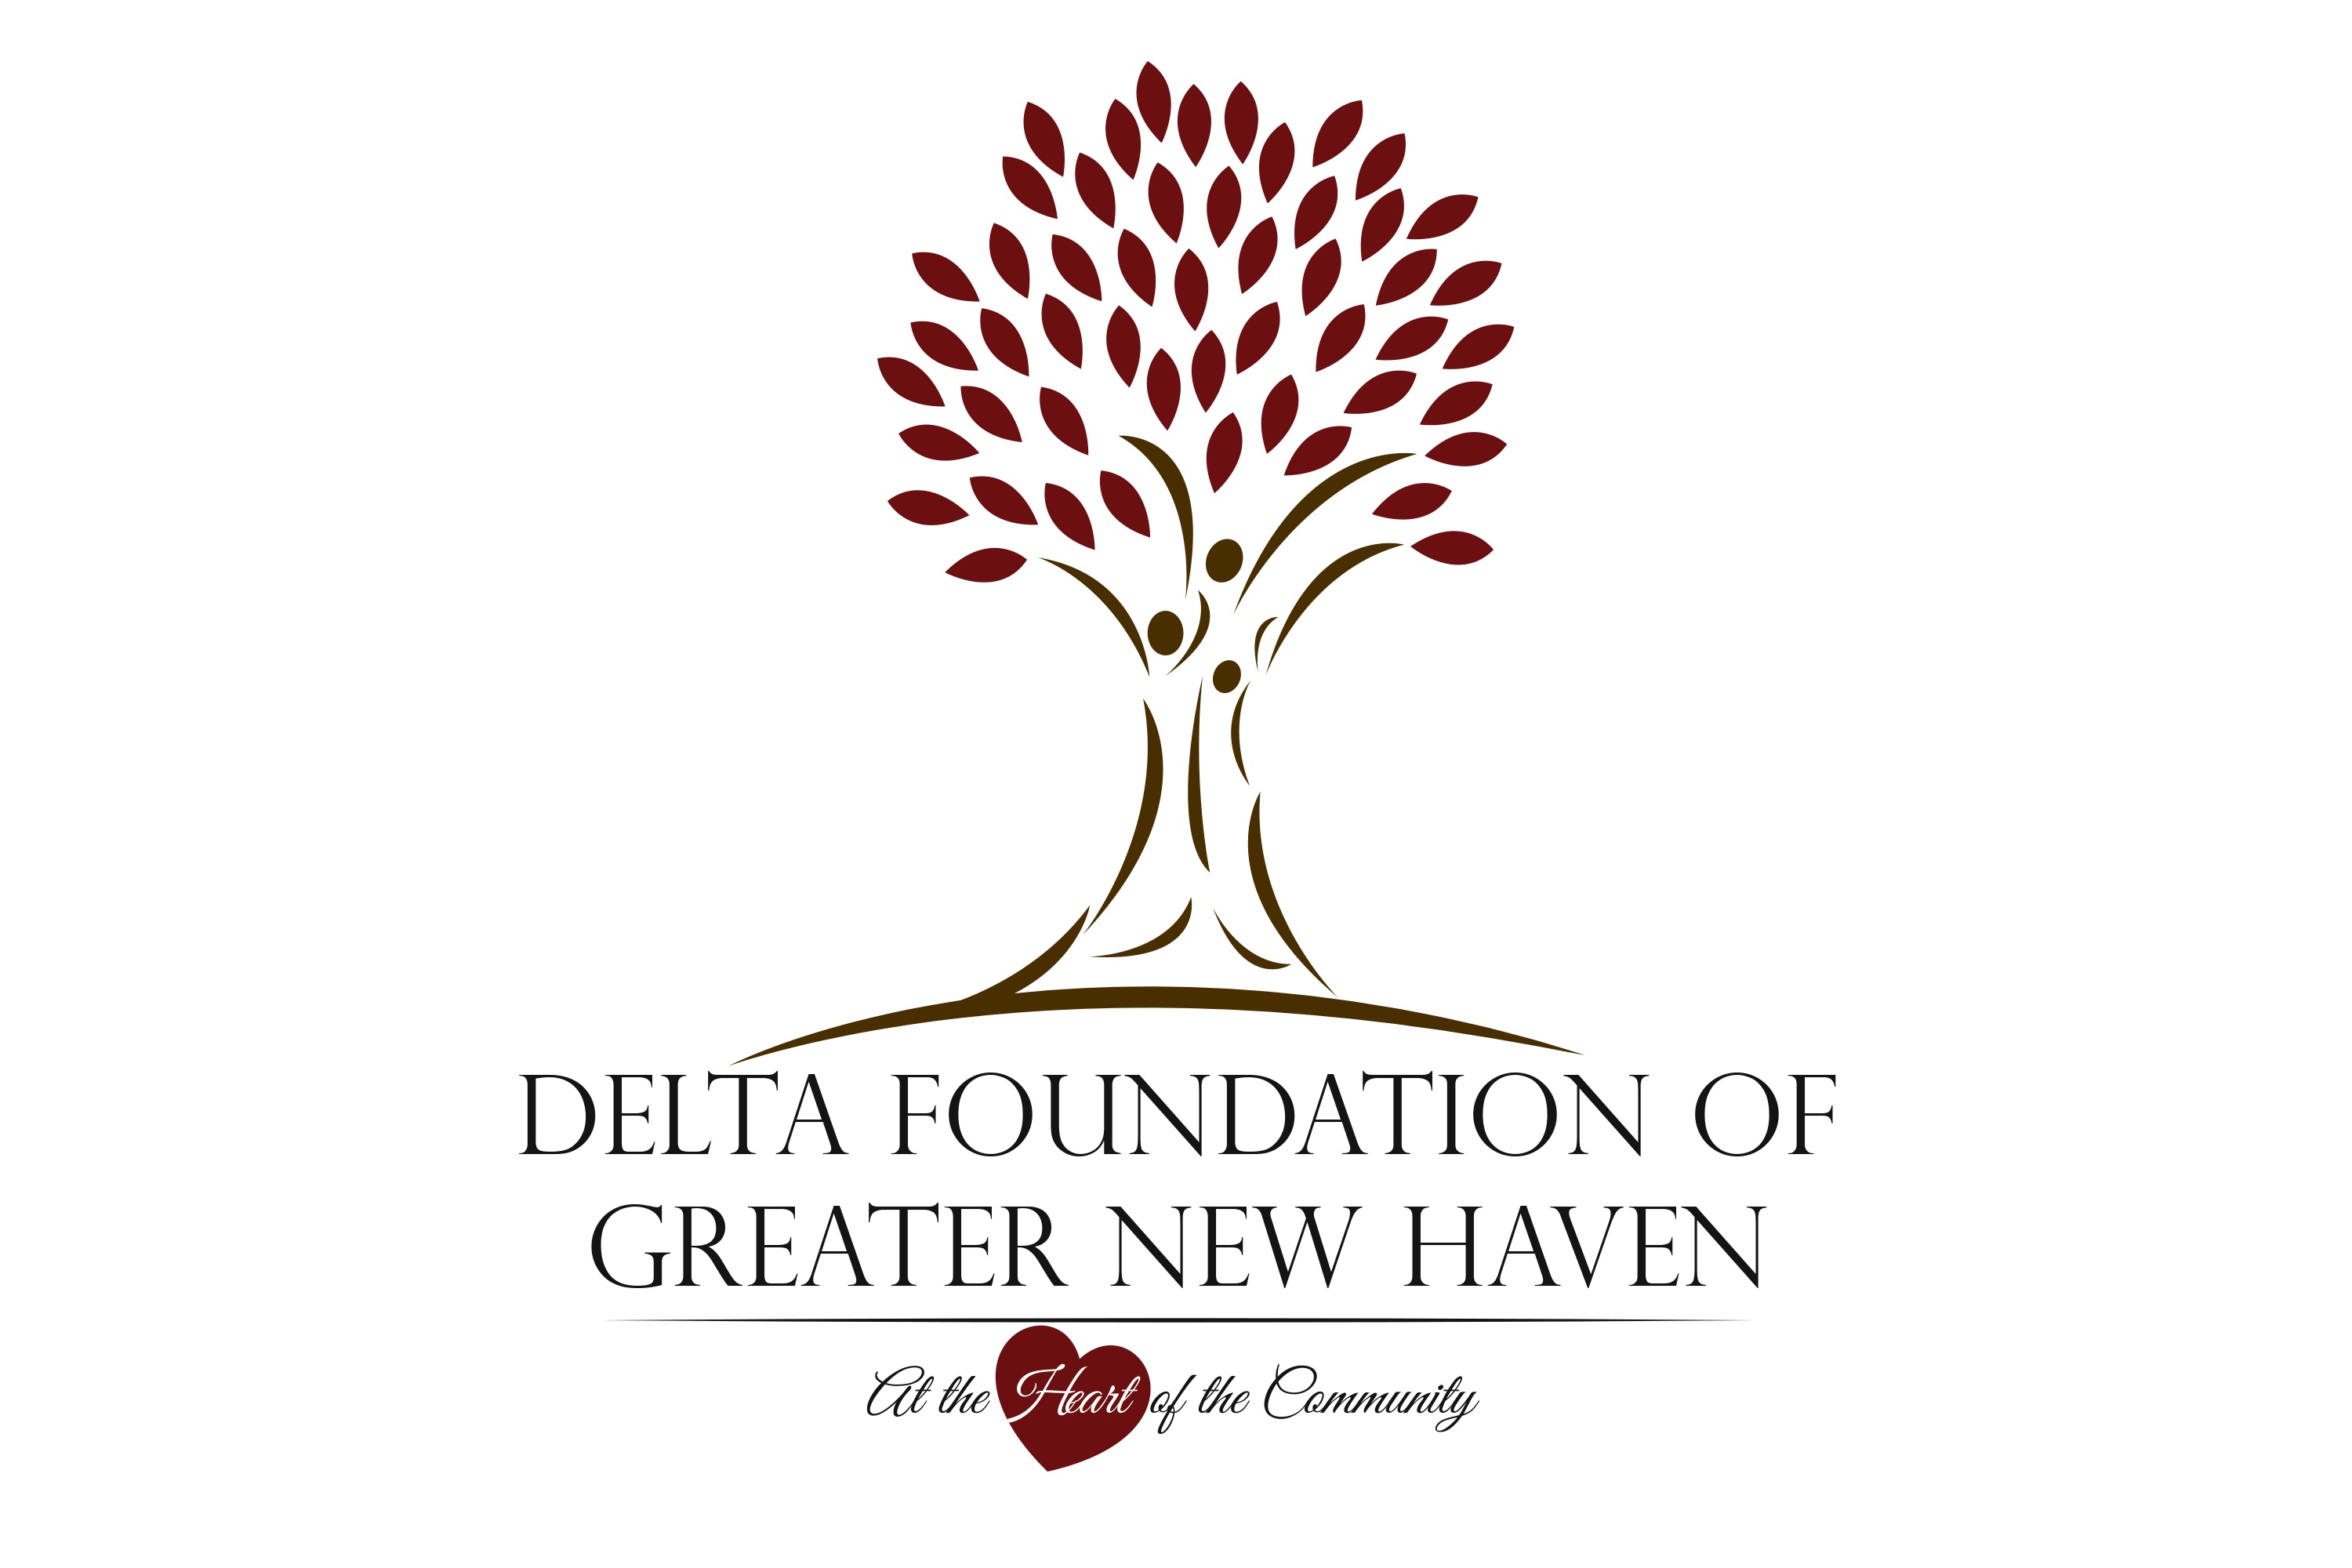 Delta Foundation of Greater New Haven